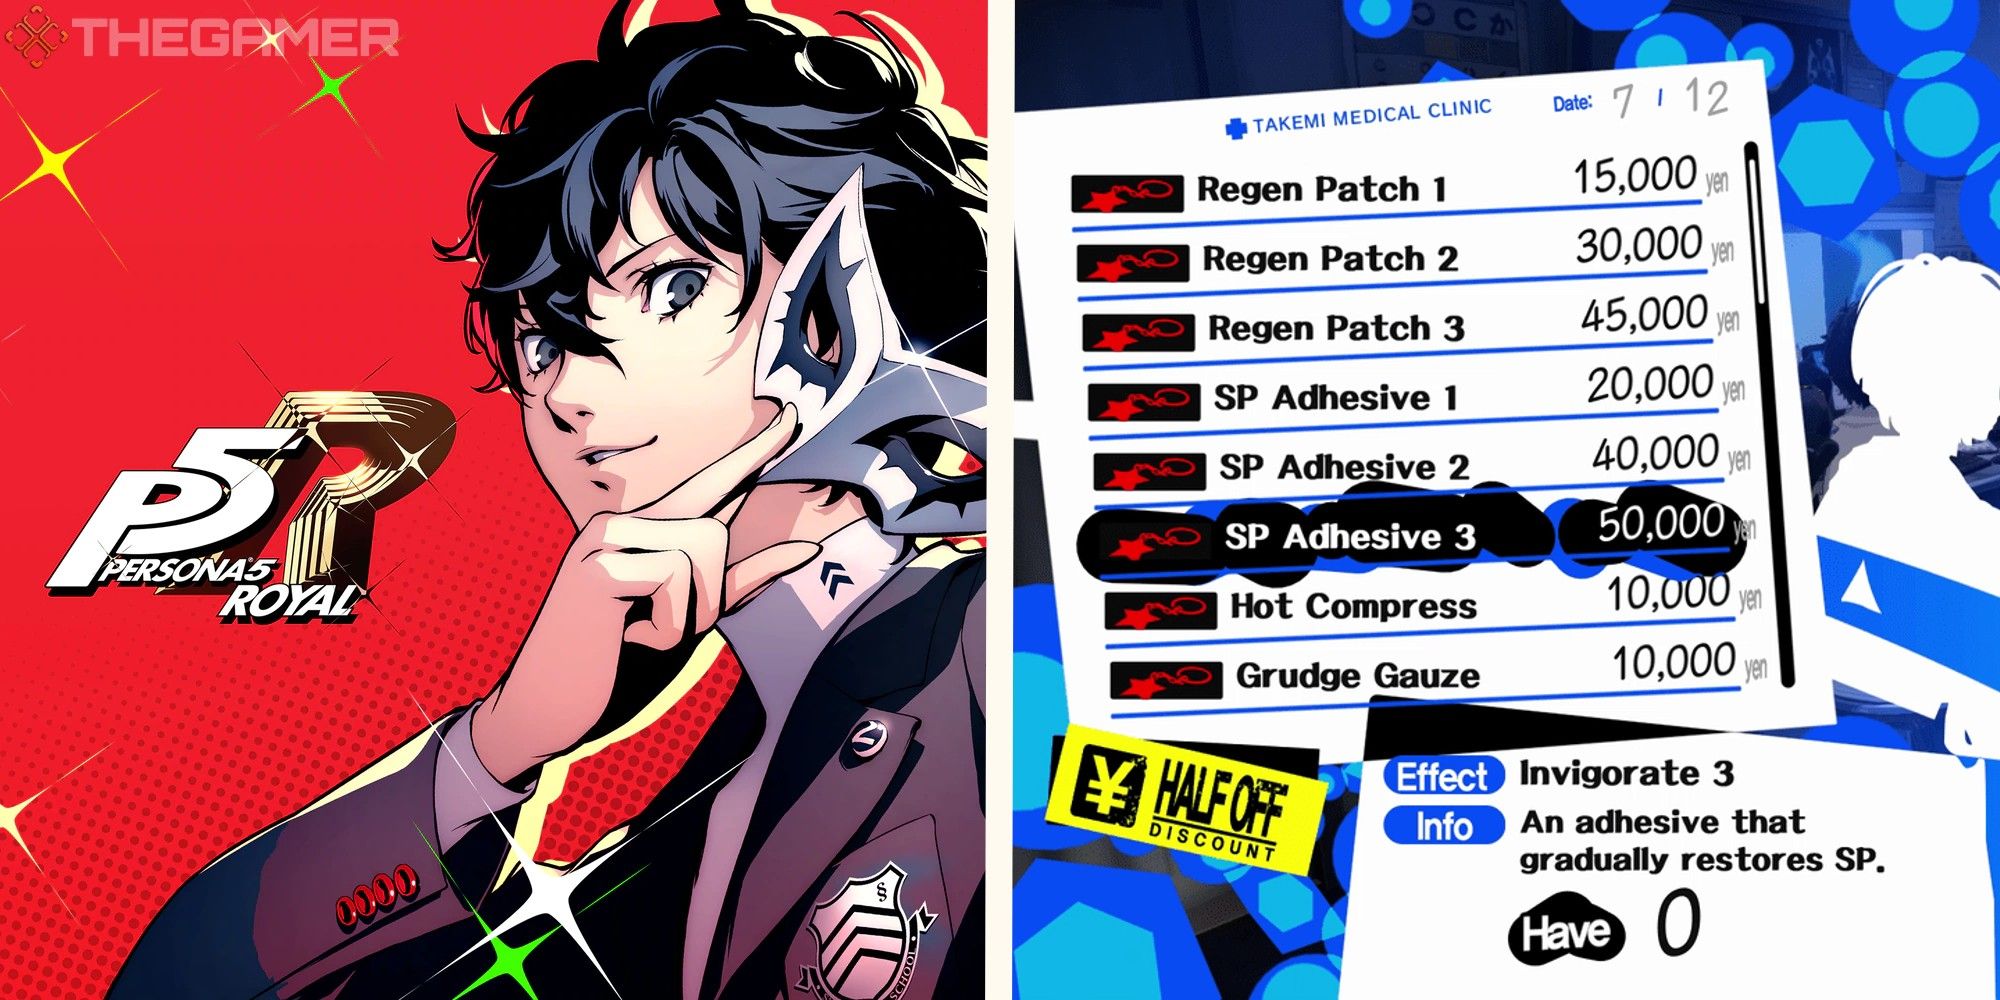 image of joker from persona next to image of SP adhesive patch description